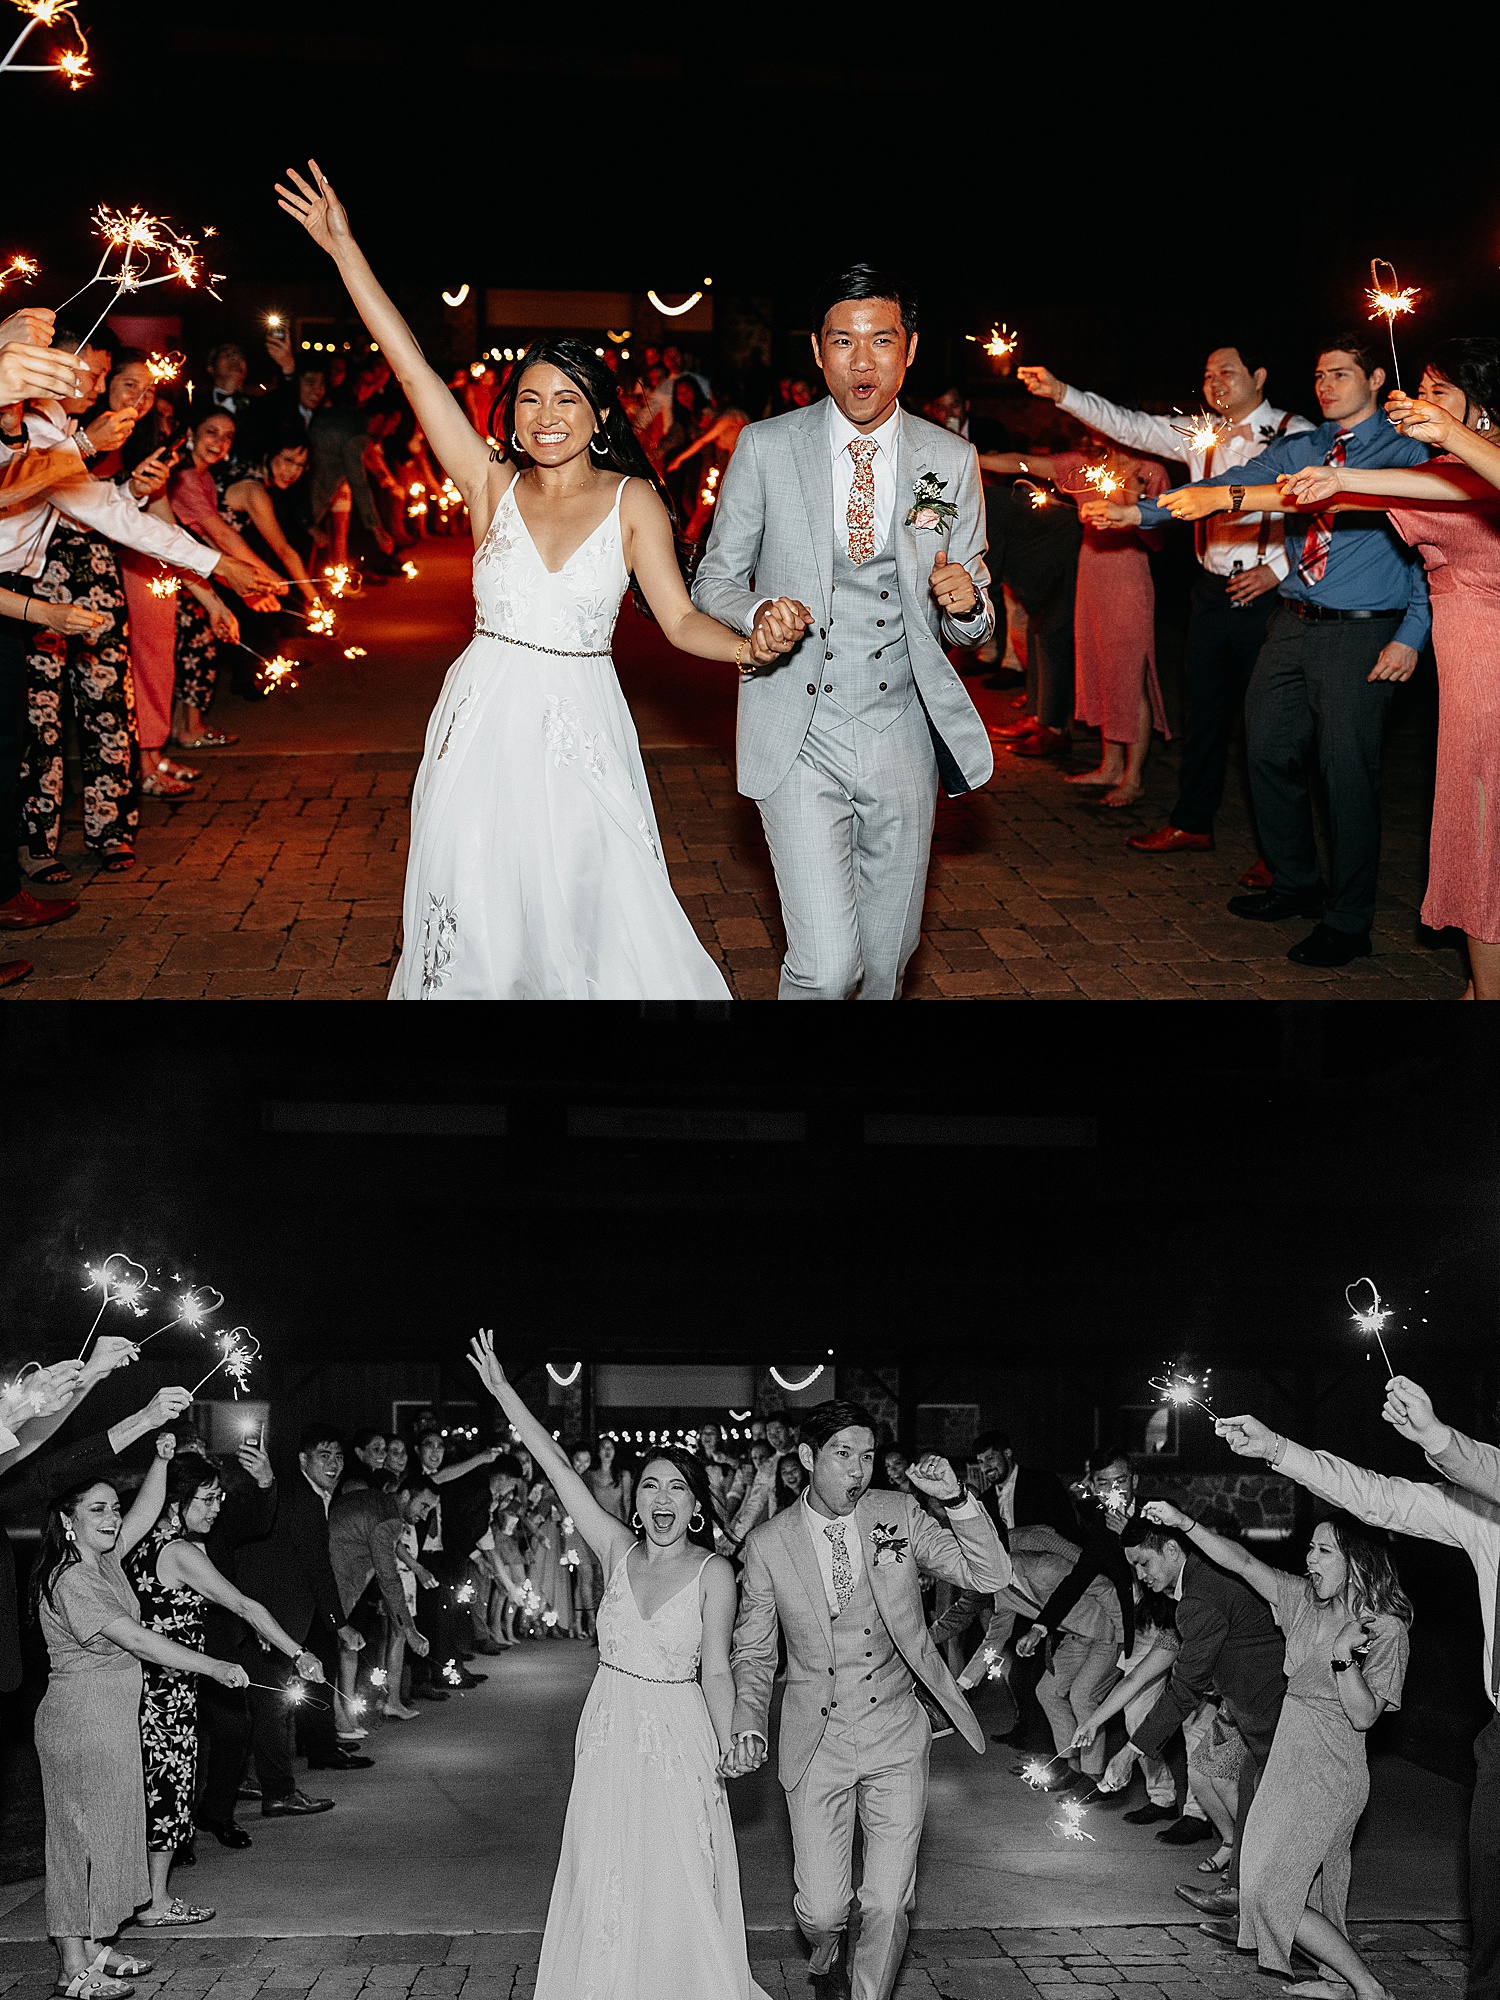 Newly married couple walk grand entrance with sparklers at The Vine in New Ulm.